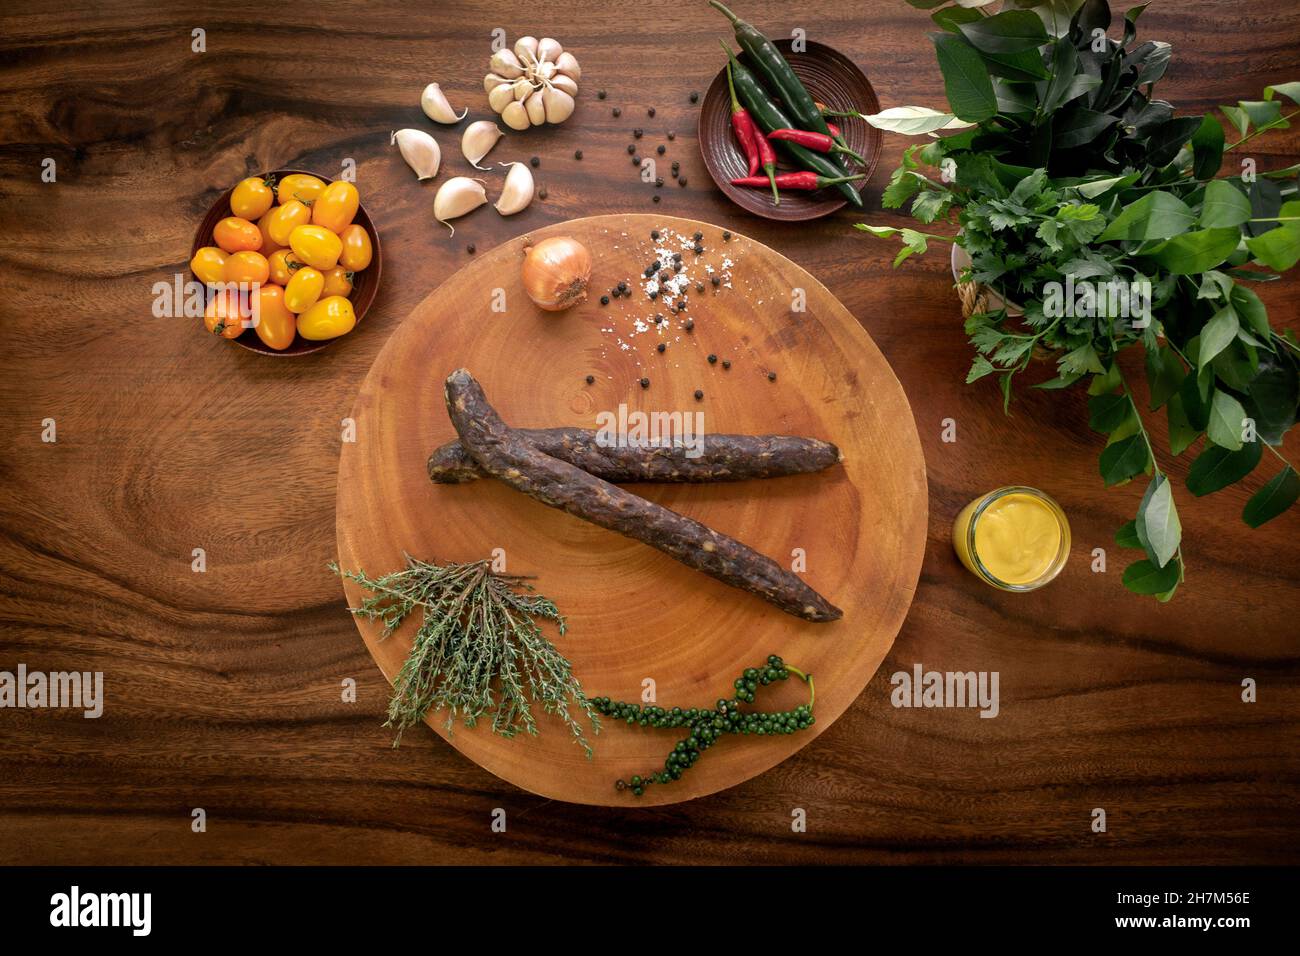 turkish sujuk spicy lamb sausages on rustic wood table with natural ingredients arrangement Stock Photo